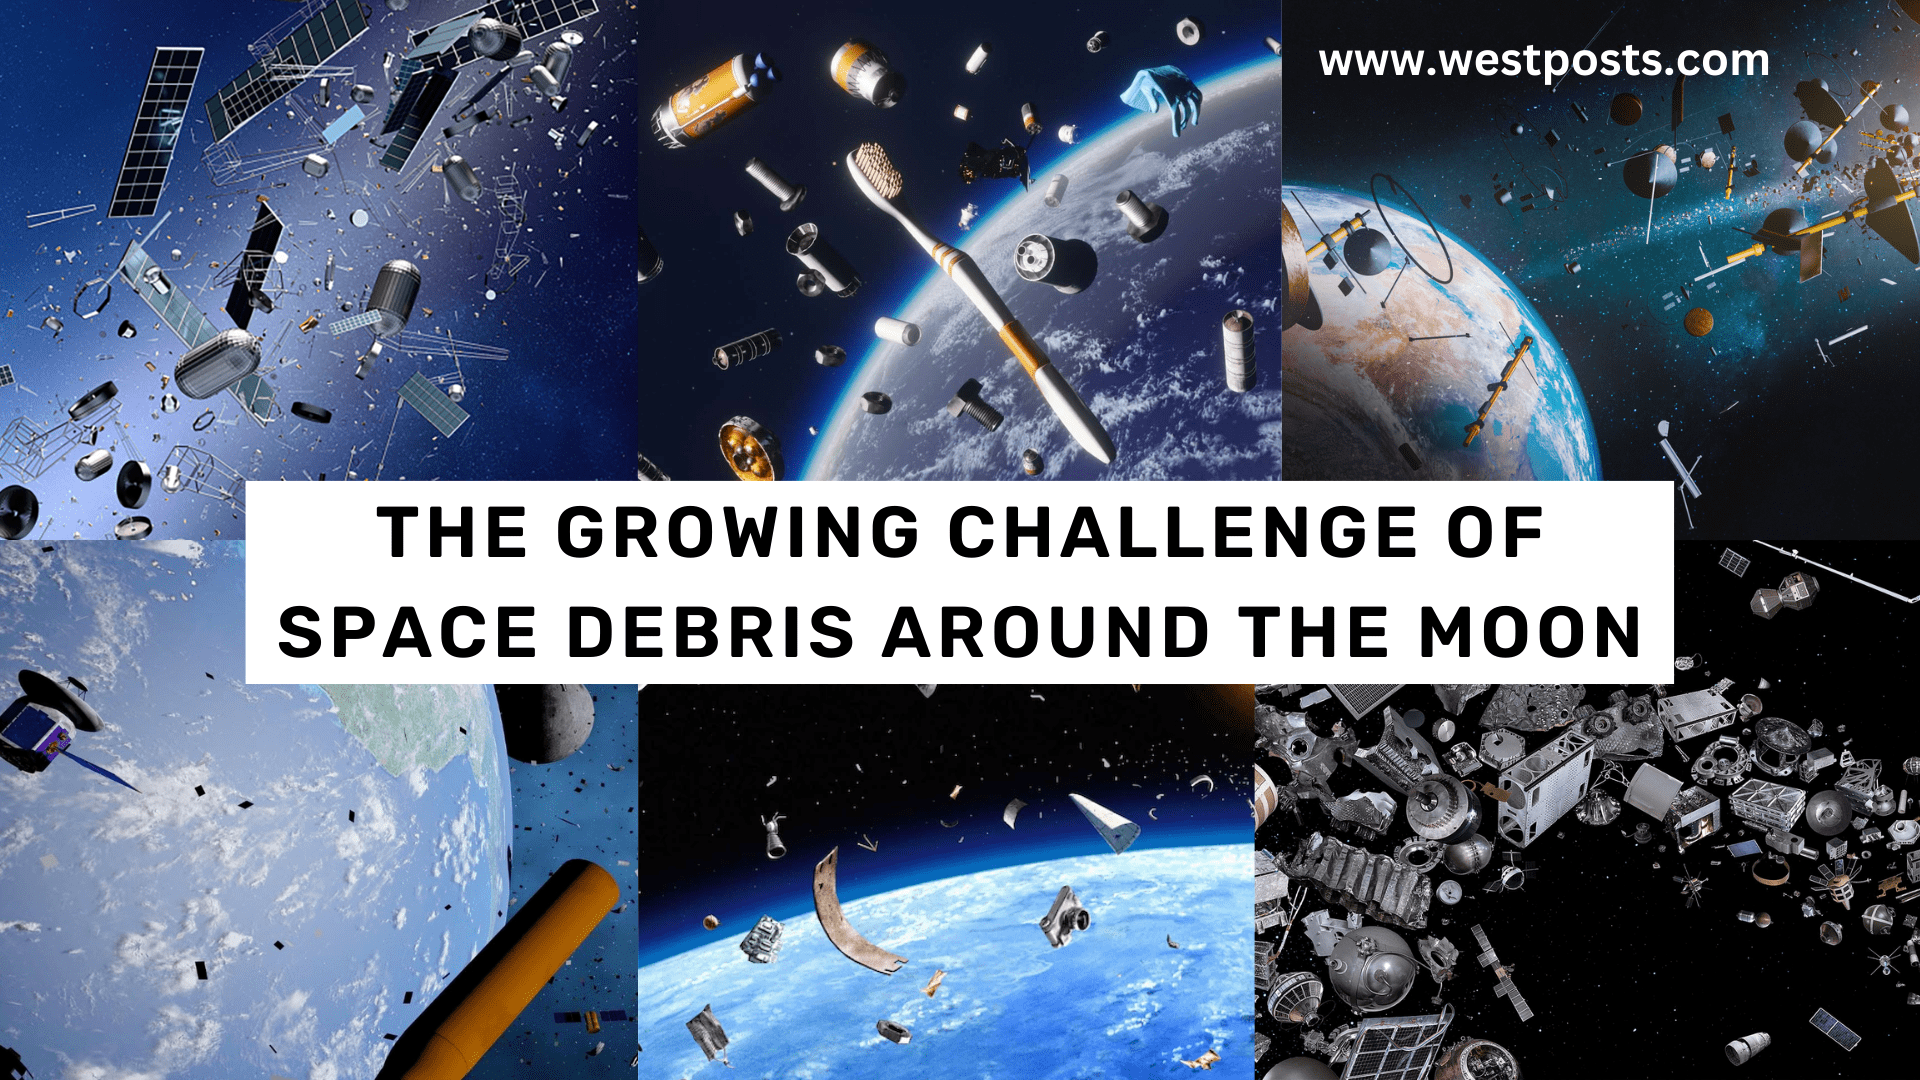 The Growing Challenge of Space Debris Around the Moon